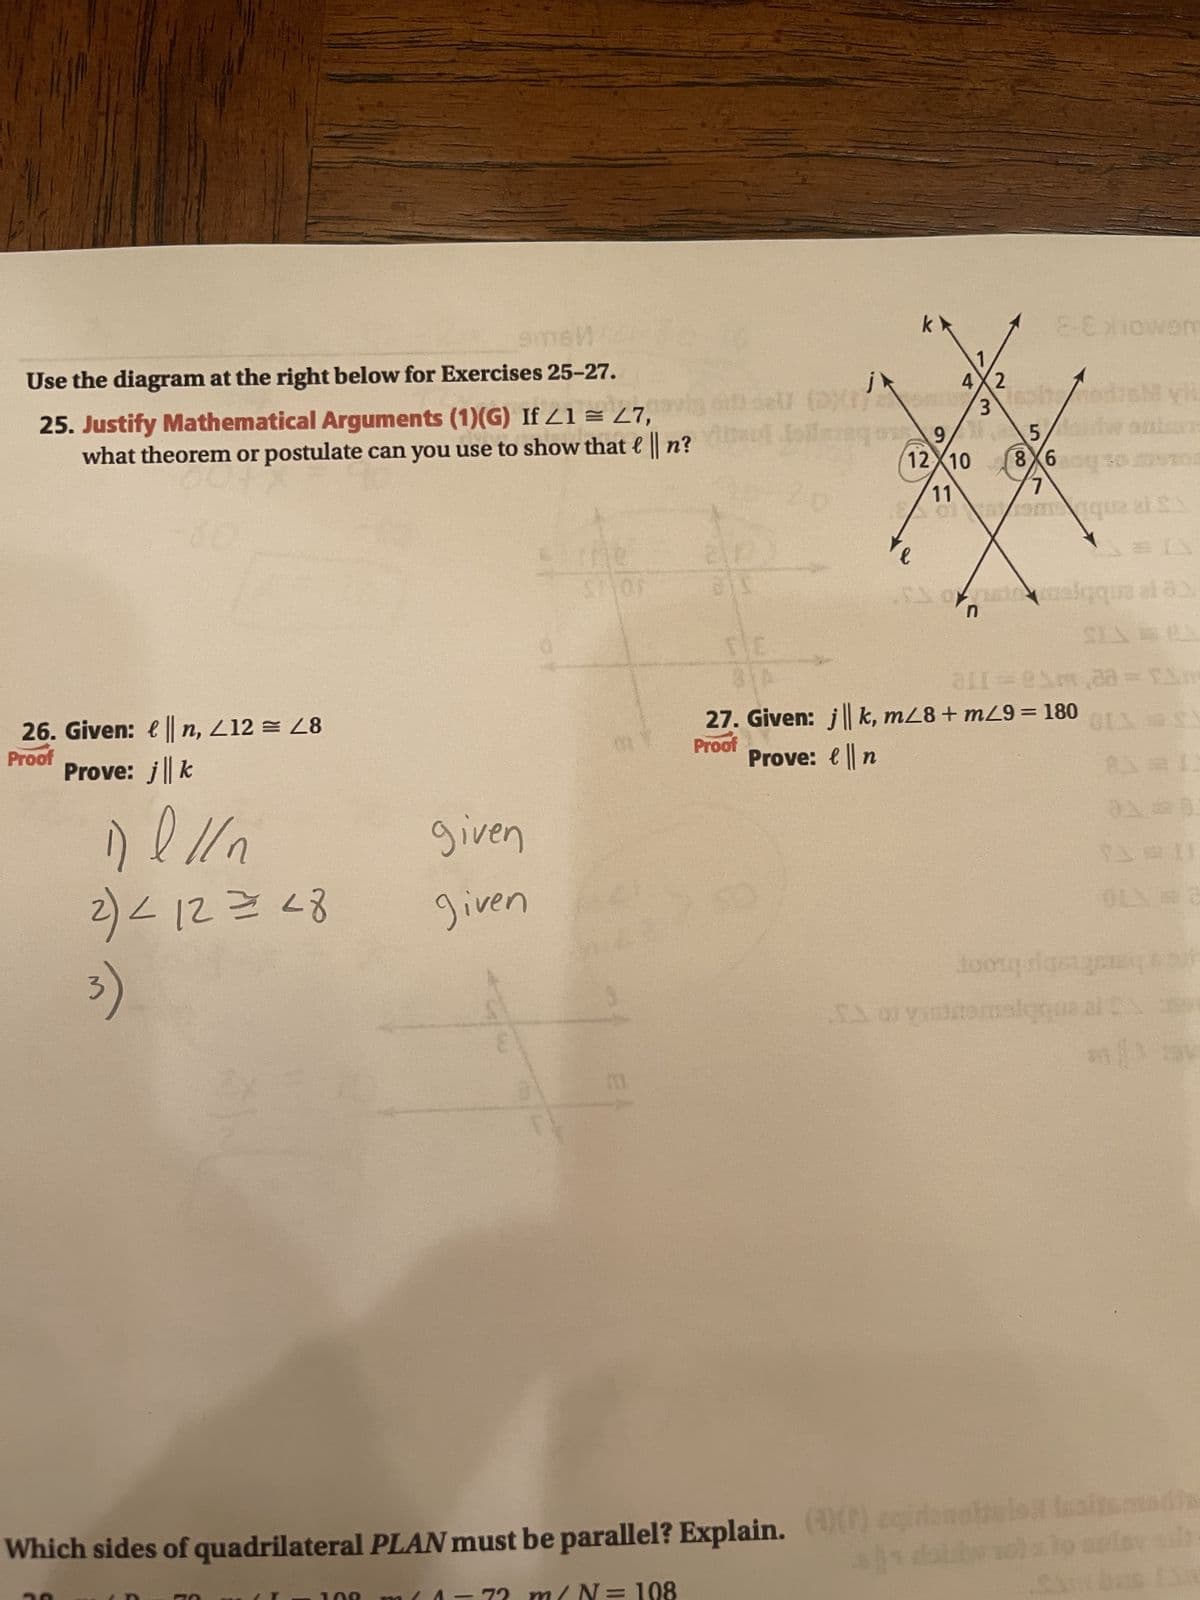 9msn
Use the diagram at the right below for Exercises 25-27.
25. Justify Mathematical Arguments (1)(G) If /1 = 27,
what theorem or postulate can you use to show that l || n?
26. Given: ||n, 412 = 28
Proof
Prove: j | k
1) l // n
2) < 12 = 28
3)
given
given
(11
j
sel (D)(1)
ais
20
k
E-Exiowom
4X2
3
9/5,
12 10 8 60
7
11
of
mquz z £1
M vi
53 ofranc cualqqua ai a
l
311=8m 38 = 1
27. Given: jk, m/8+ m29 = 180
Prove: n
Proof
tooug greq
calqqus at Six
Talyshteretqqusa
Which sides of quadrilateral PLAN must be parallel? Explain. (() eqiranotaulo latsmedis
= 108